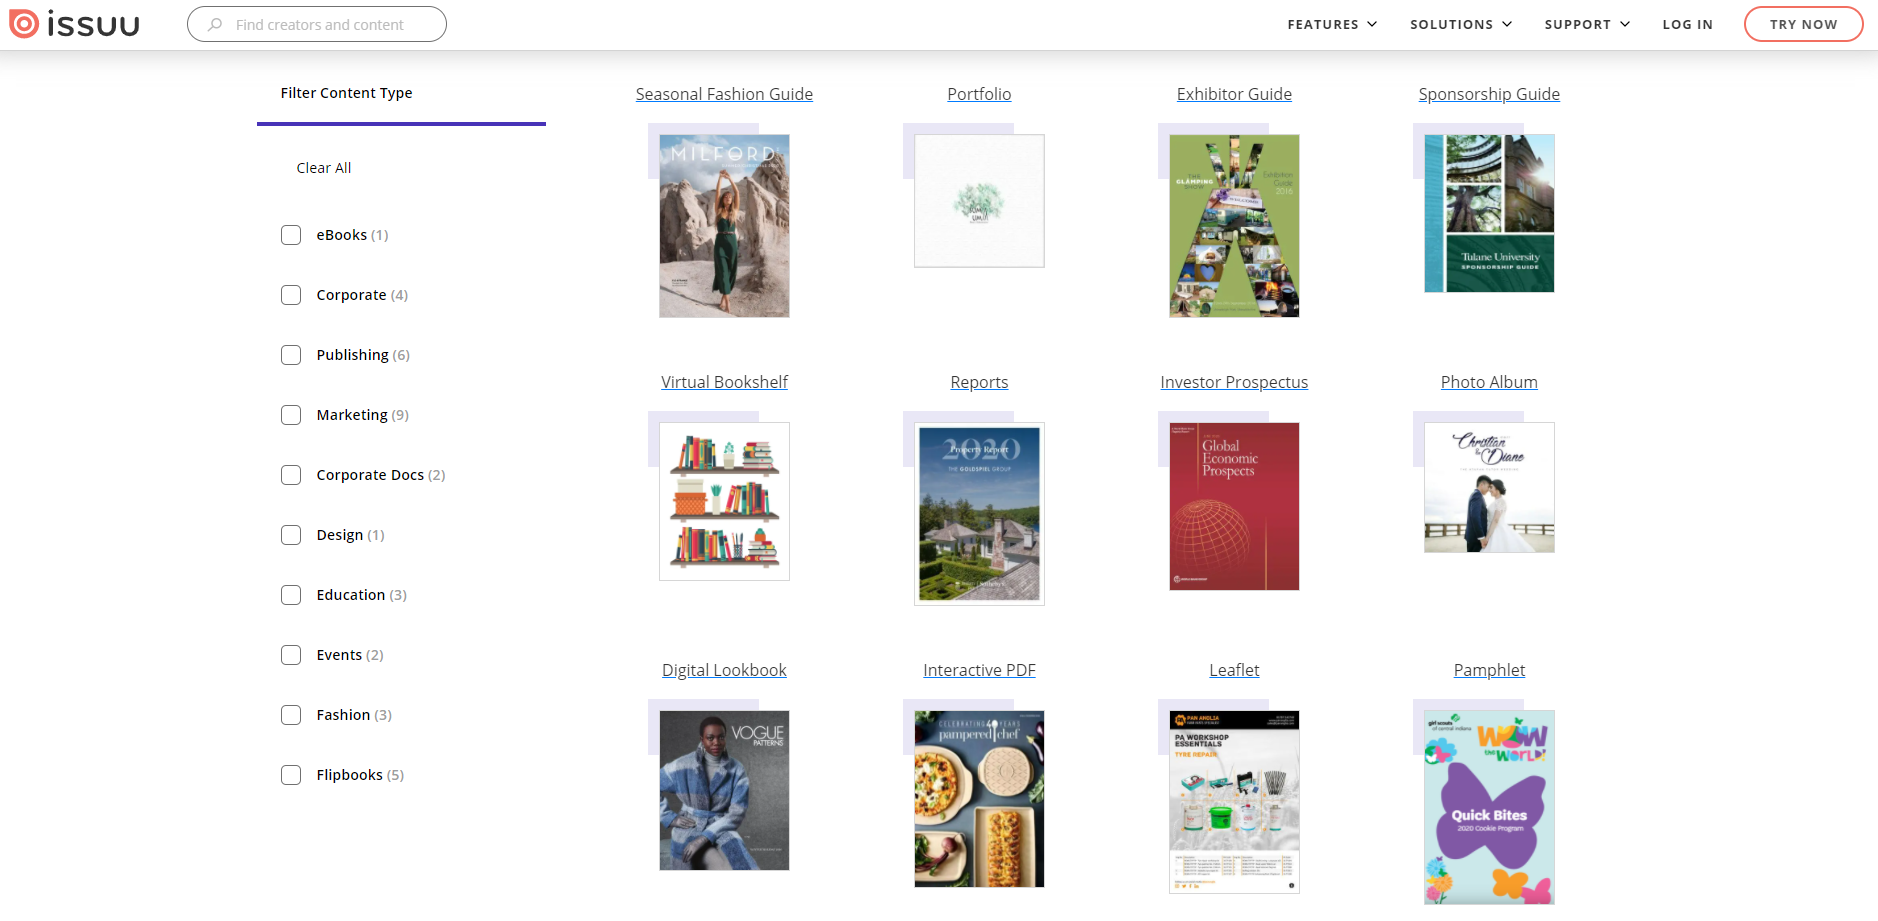 Issuu is one of the interesting digital publishing platforms